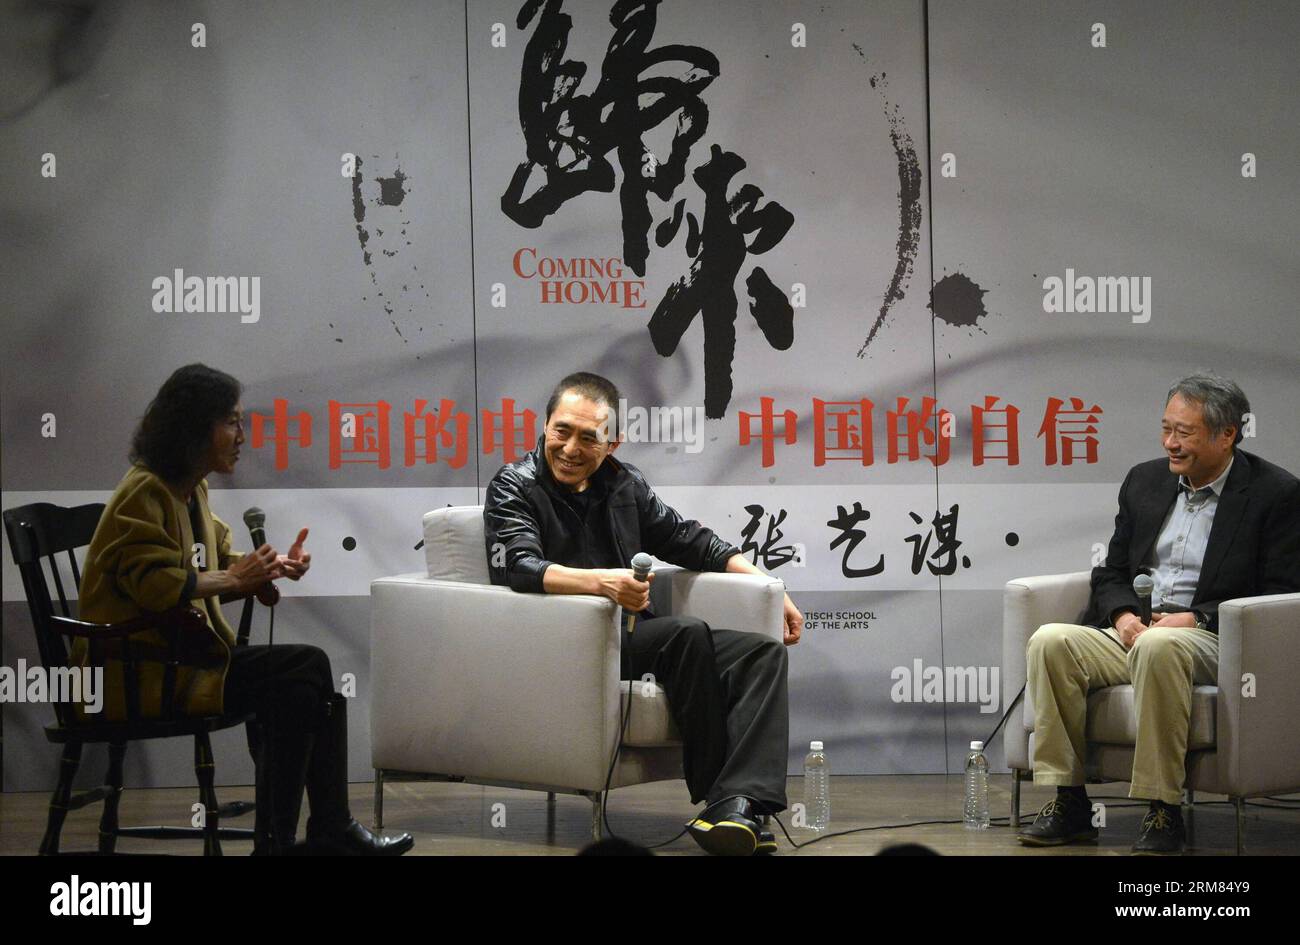 NEW YORK, March 27, 2014 (Xinhua) -- Two-time Oscar-winning director Ang Lee (1st R) and renowned film director Zhang Yimou (2nd R) attend a dialog in New York, the United States, March 27, 2014. The two film directors on Thursday held a dialog about Chinese film culture and Zhang s new movie Coming Home . (Xinhua/Wang Lei) (lyx) U.S.-NEW YORK-FILM DIRECTORS-ZHANG YIMOU-ANG LEE-DIALOGUE PUBLICATIONxNOTxINxCHN   New York March 27 2014 XINHUA Two Time Oscar Winning Director Ang Lee 1st r and renowned Film Director Zhang Yimou 2nd r attend a Dialogue in New York The United States March 27 2014 Th Stock Photo